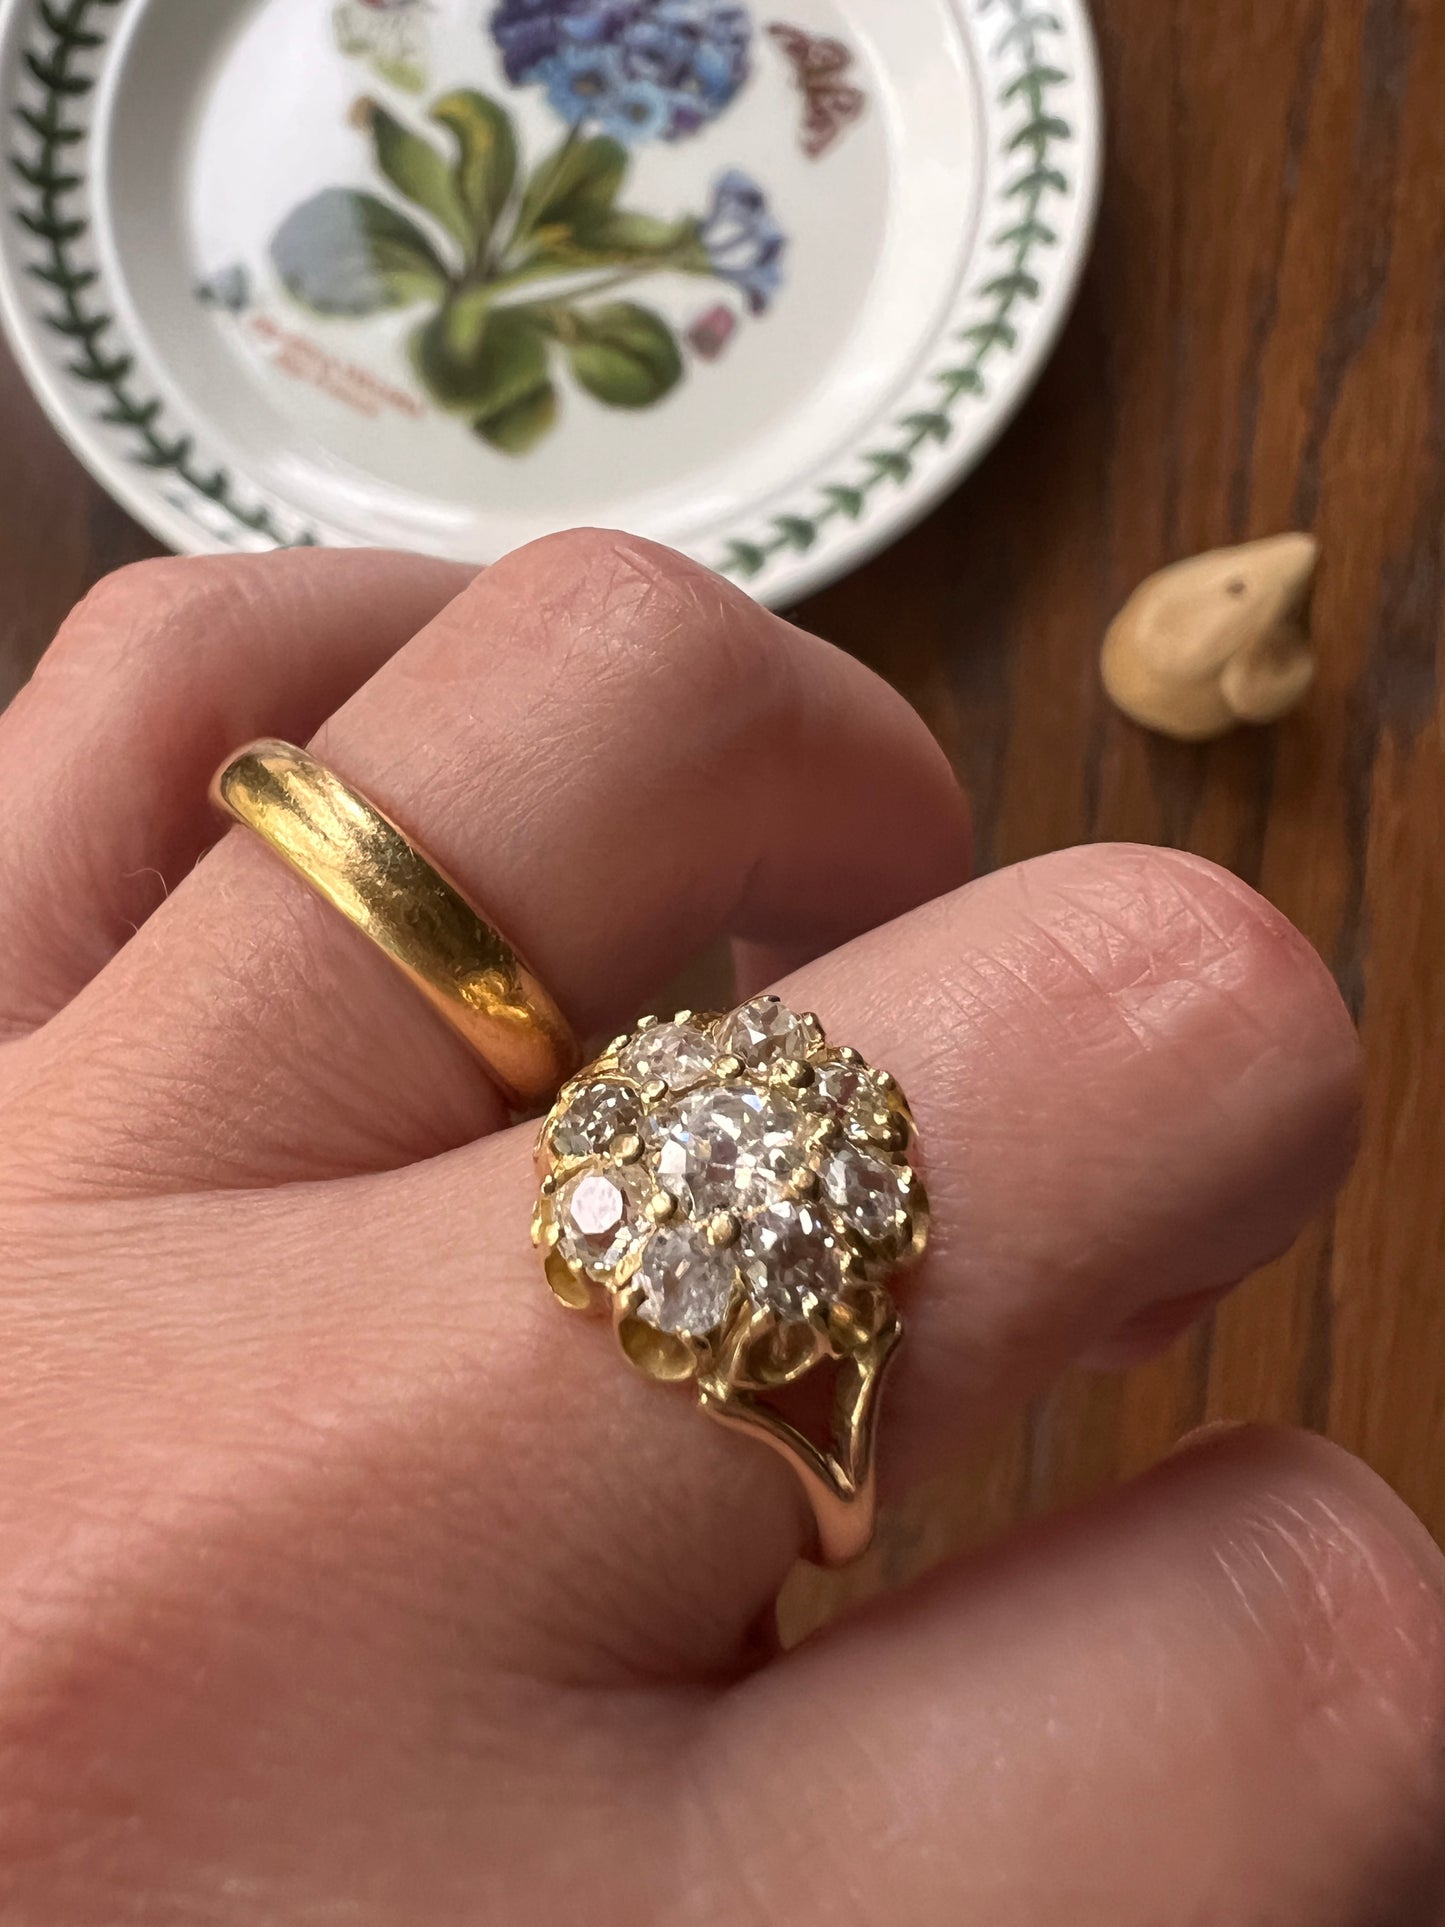 ANTIQUE 1.25 Carat 9 Old Mine Cut DIAMOND Cluster Ring 4.3g 18k Gold Romantic Gift Stacker Band OMC Victorian